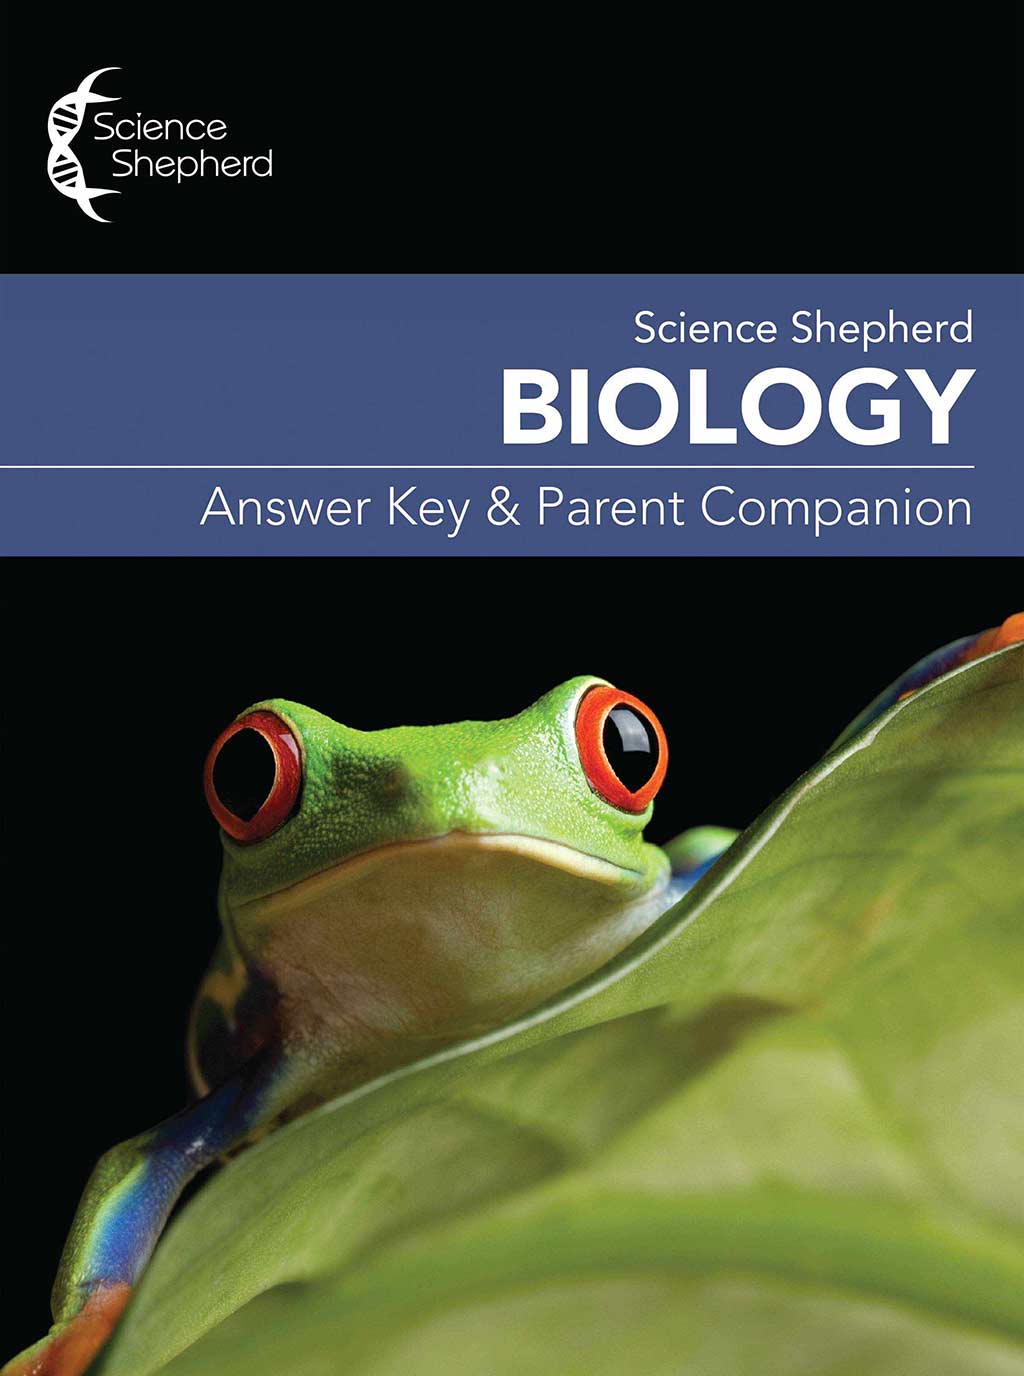 Science Shepherd Biology homeschool high school Answer Key and Parent Companion cover